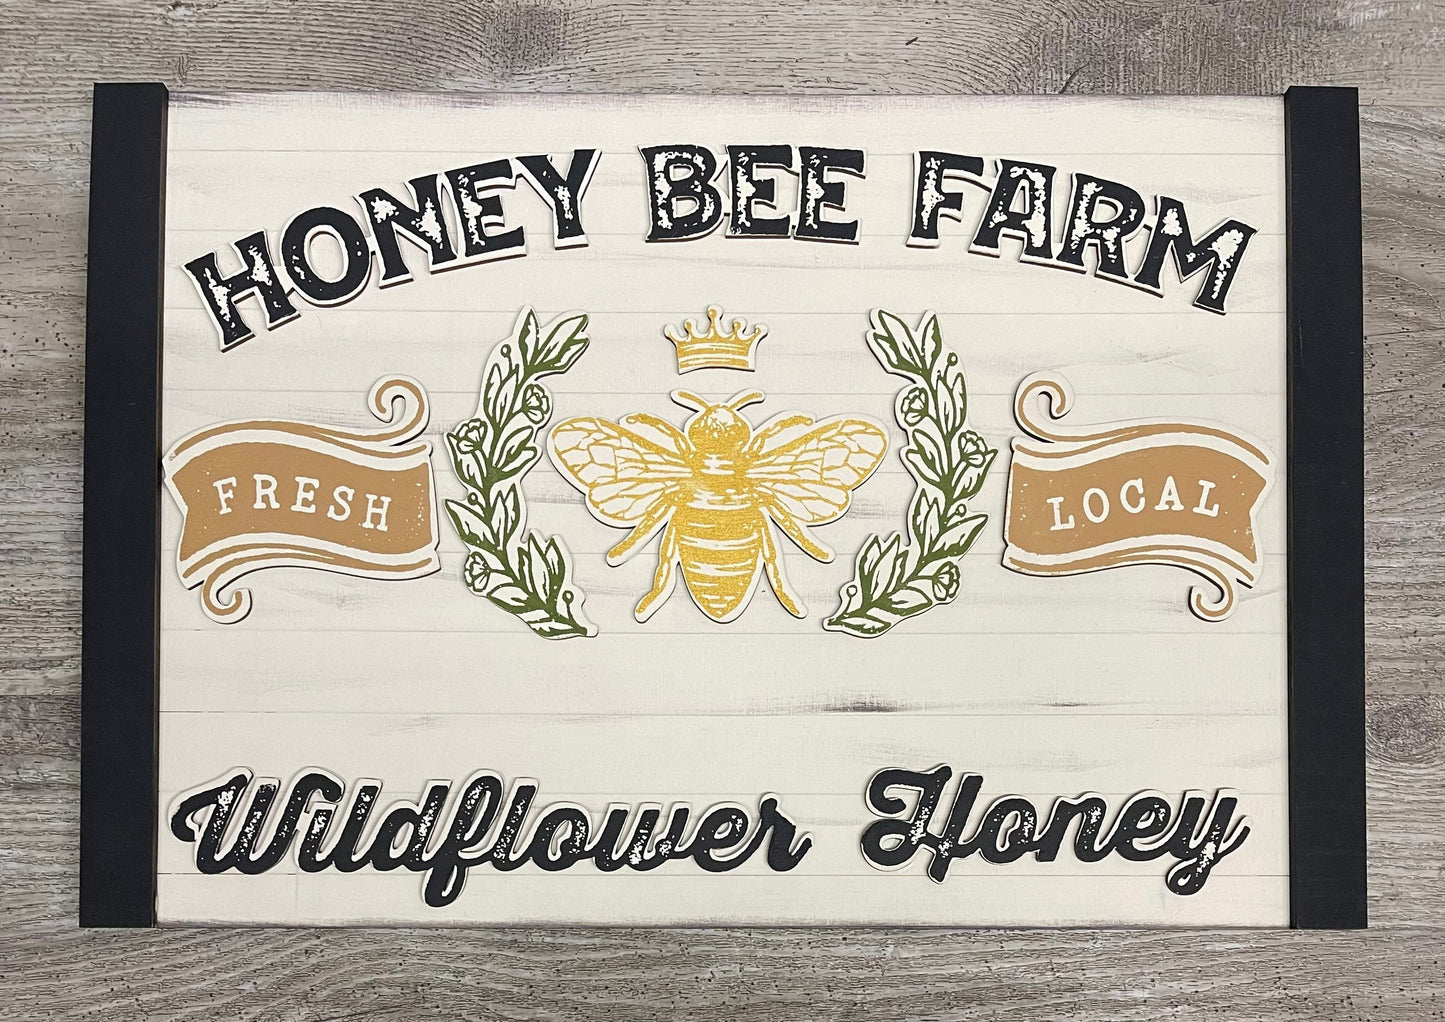 Honey Bee Farms 2 Bees and 2 Crowns unpainted wooden cutouts, ready for you to paint